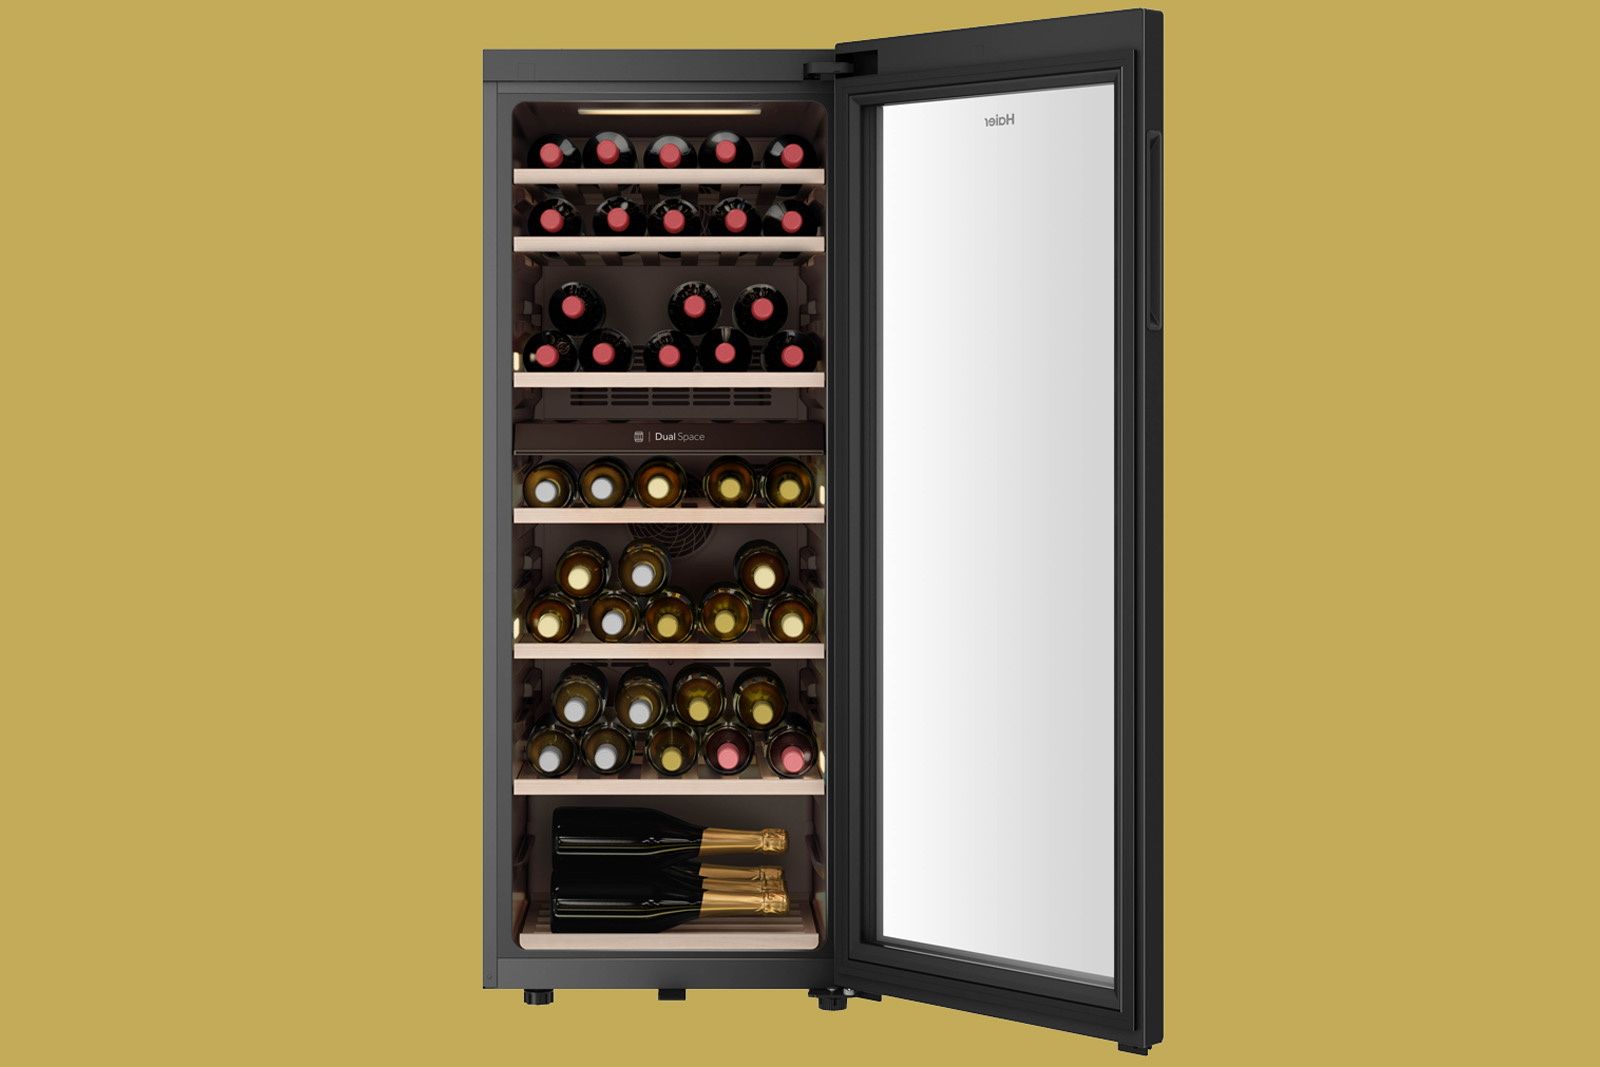 Haier's connected 'wine bank' enables you to organise wines with an app and adjust temperature zones photo 4